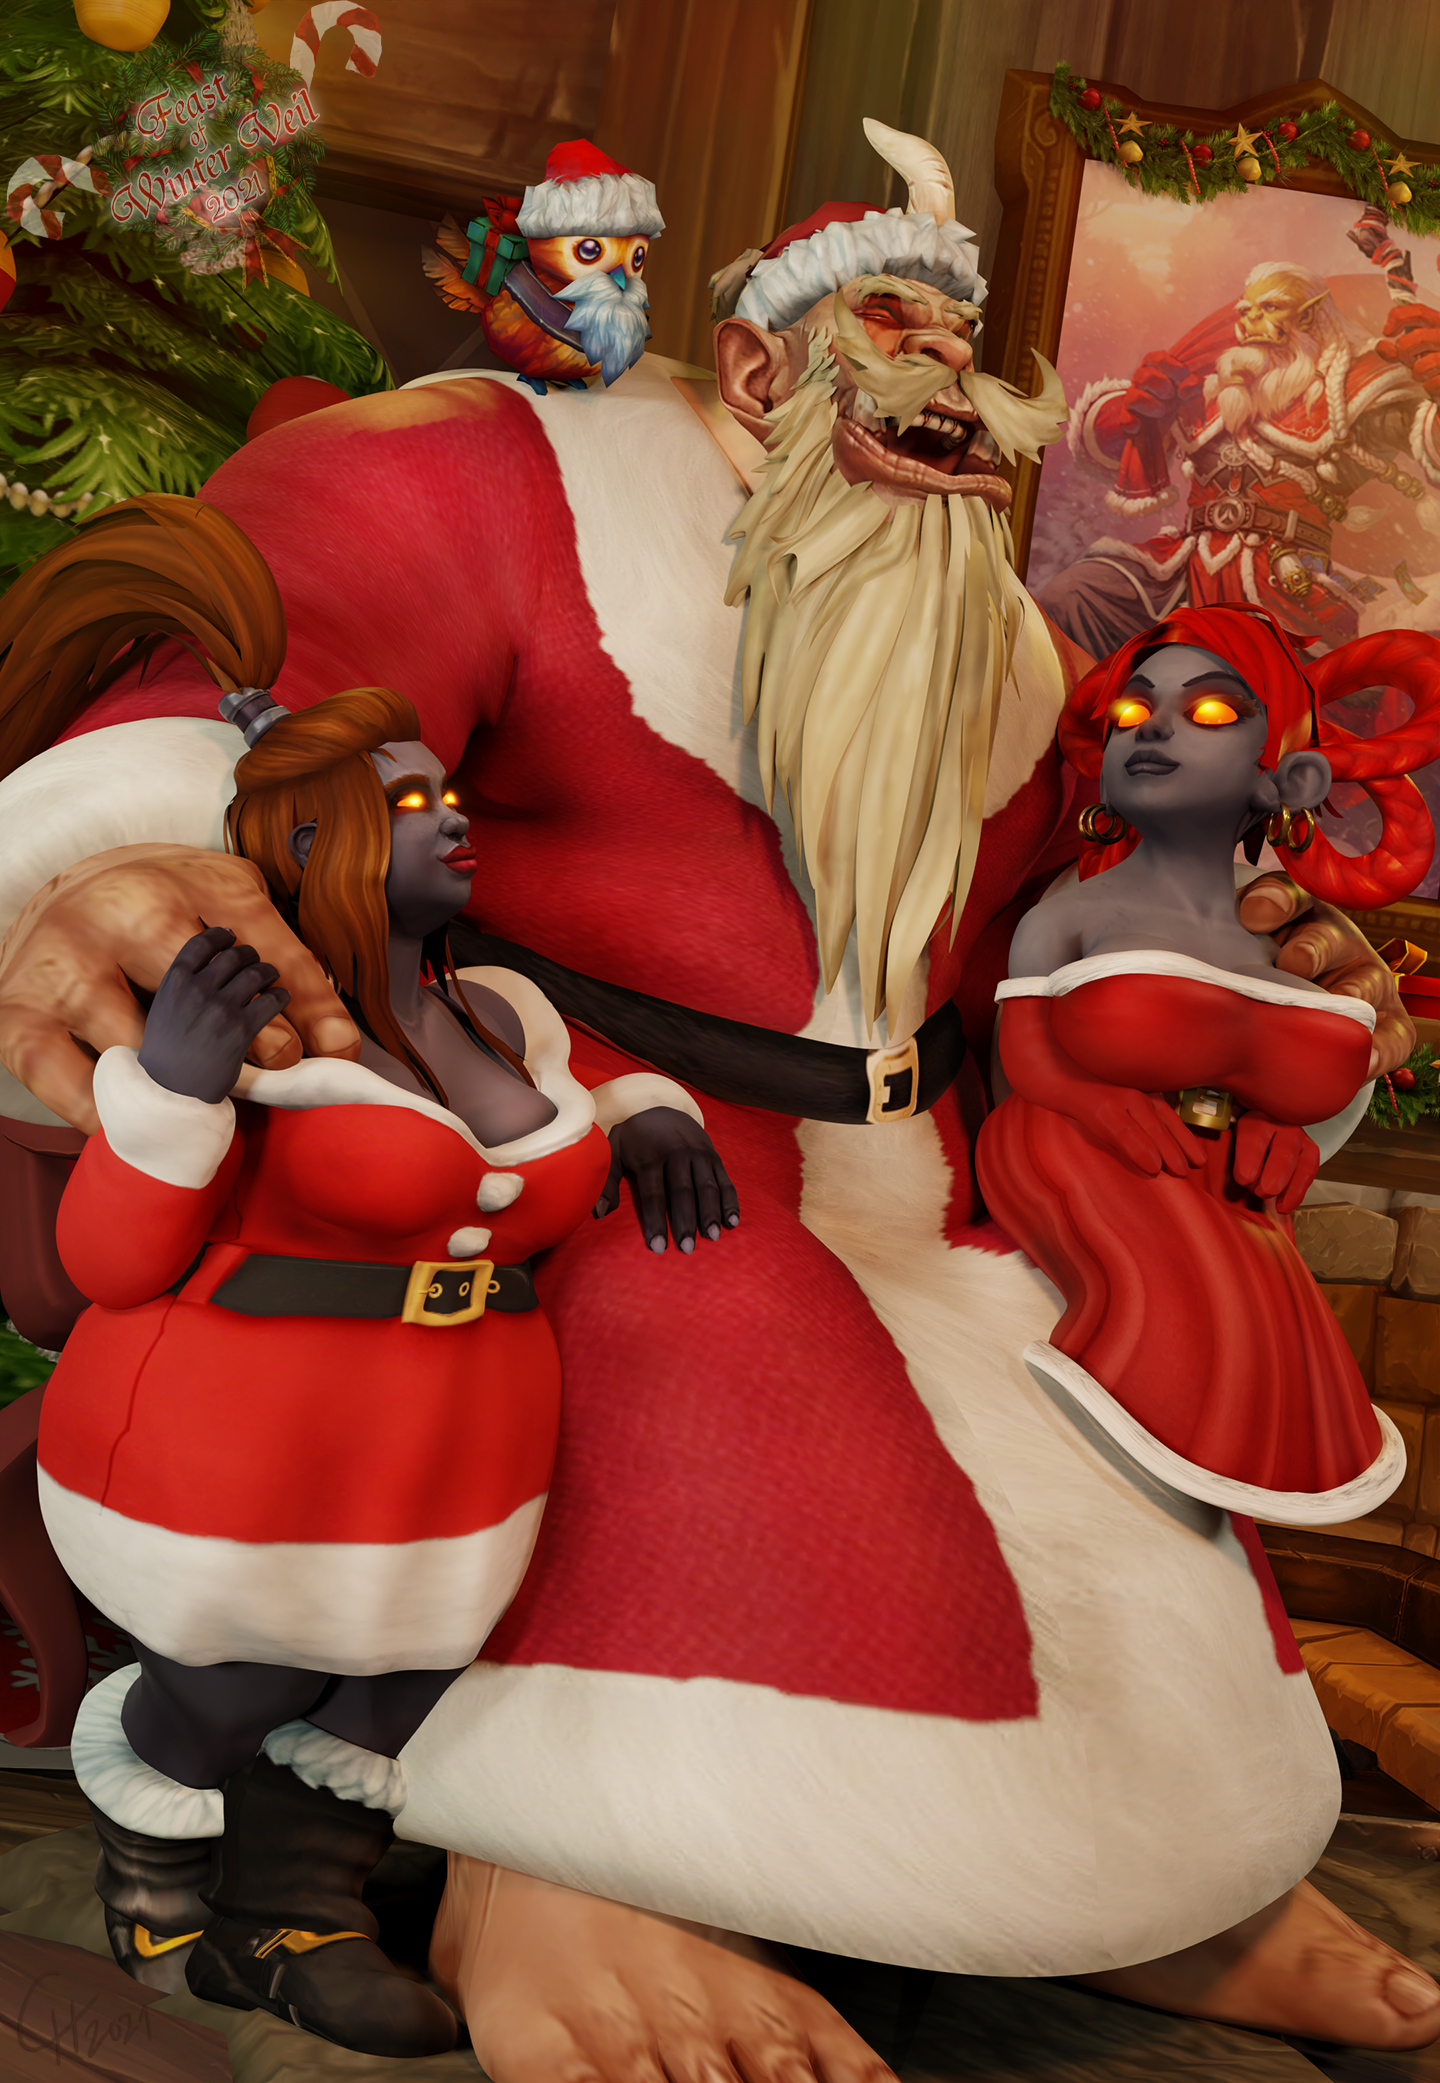 Winter Veil 2021: Greeting Strong-Dad Frost
Strong-Dad Frost, the jolly Winter Veil figure
of Draenor, is currently visiting the good boys and
girls of Azeroth. While having a 'Meet-and-Greet'
at a tavern, two Dark Iron girls finally have their
festive date with the jolly giant of the merrymaking.
[b][url=http://bakaras.com/murlocish/albums/userpics/10001/8/WinterVeil2021-01XL.png]==XL-Size Edit==[/url][/b]
Keywords: OC;dwarf;dark iron dwarf;dark iron gnome;ogre;SFW